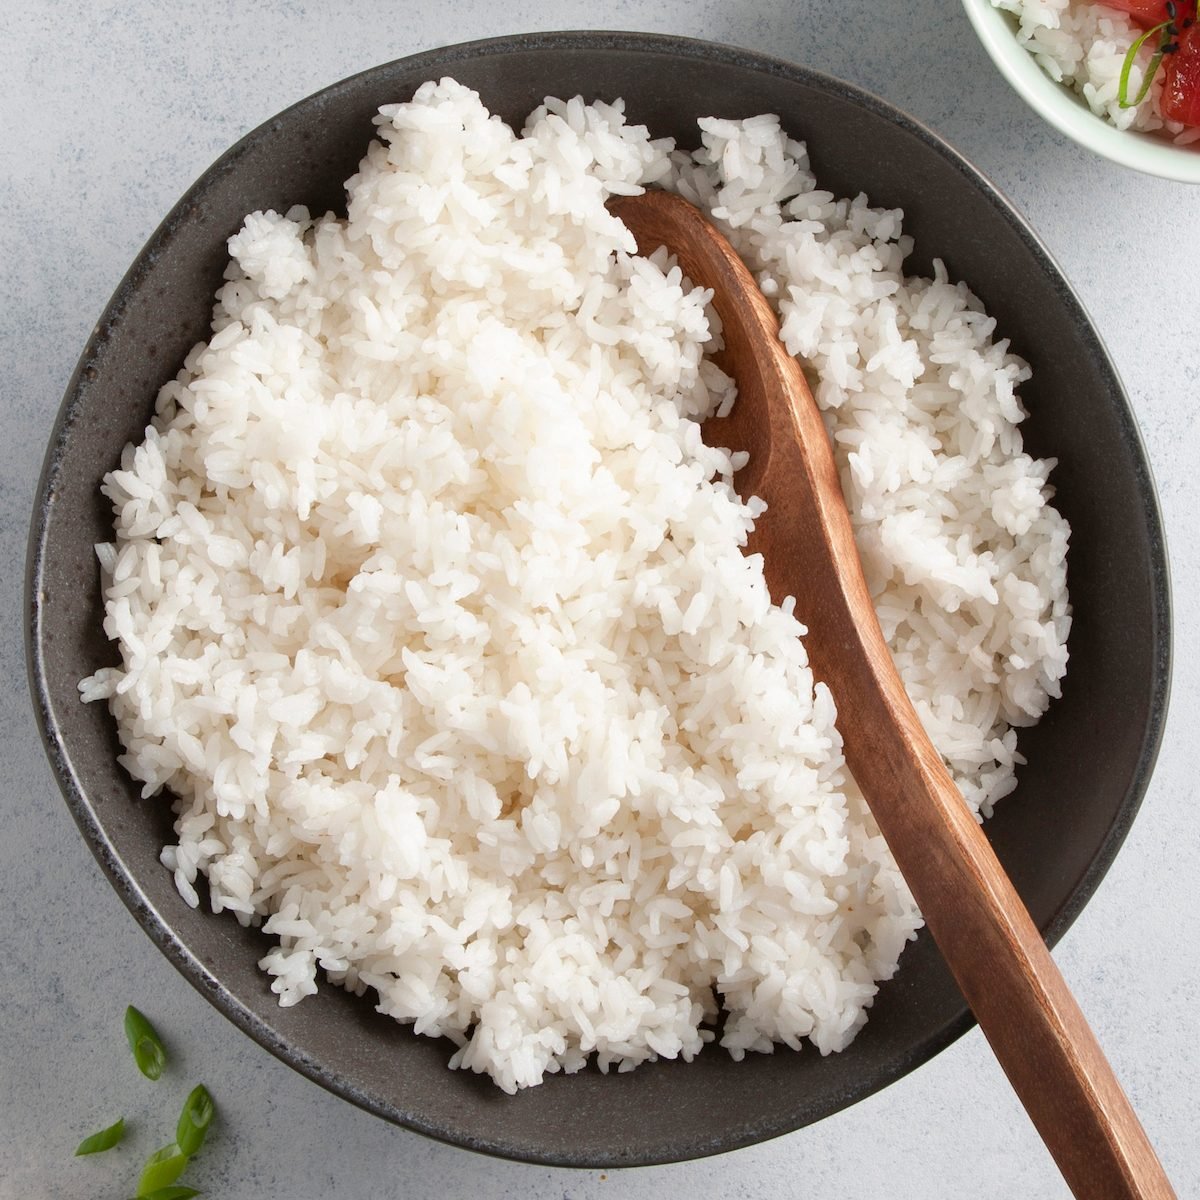 A bowl of fluffy, white cooked rice.